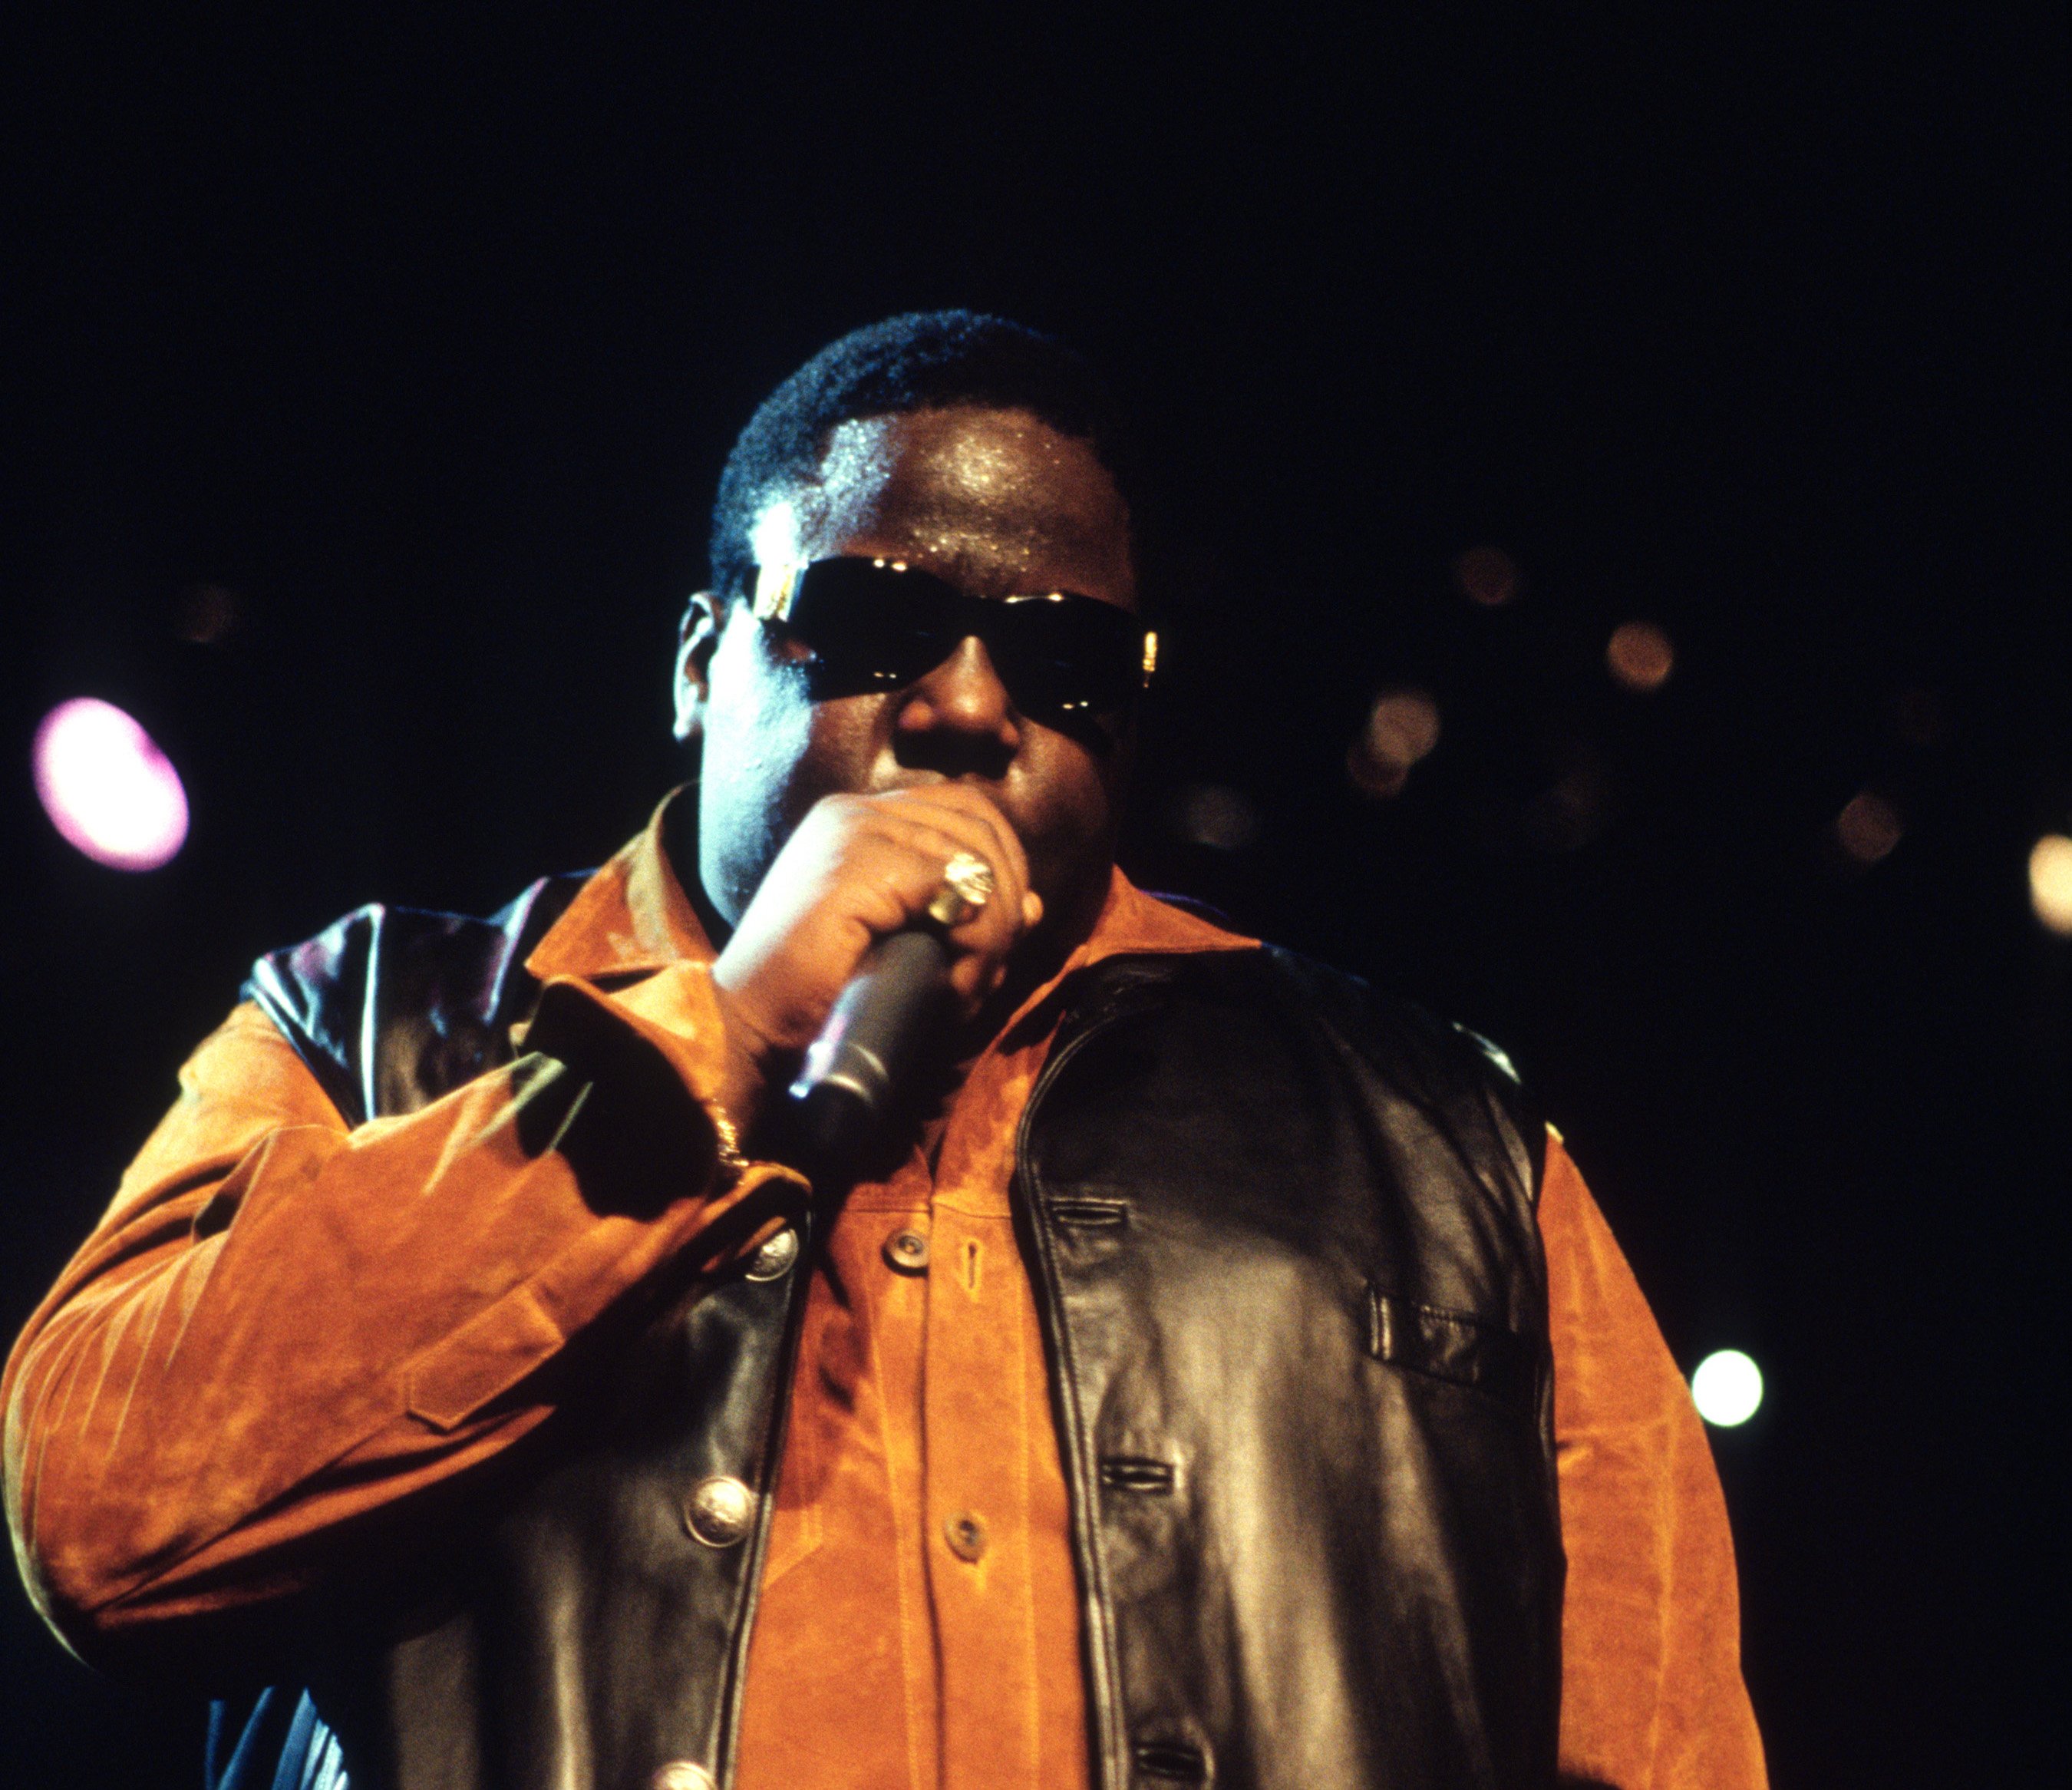 Rapper Notorious B.I.G. AKA Biggie Smalls (Christopher Wallace) performs on October 5, 1995 during the UrbanAid Lifebeat concert